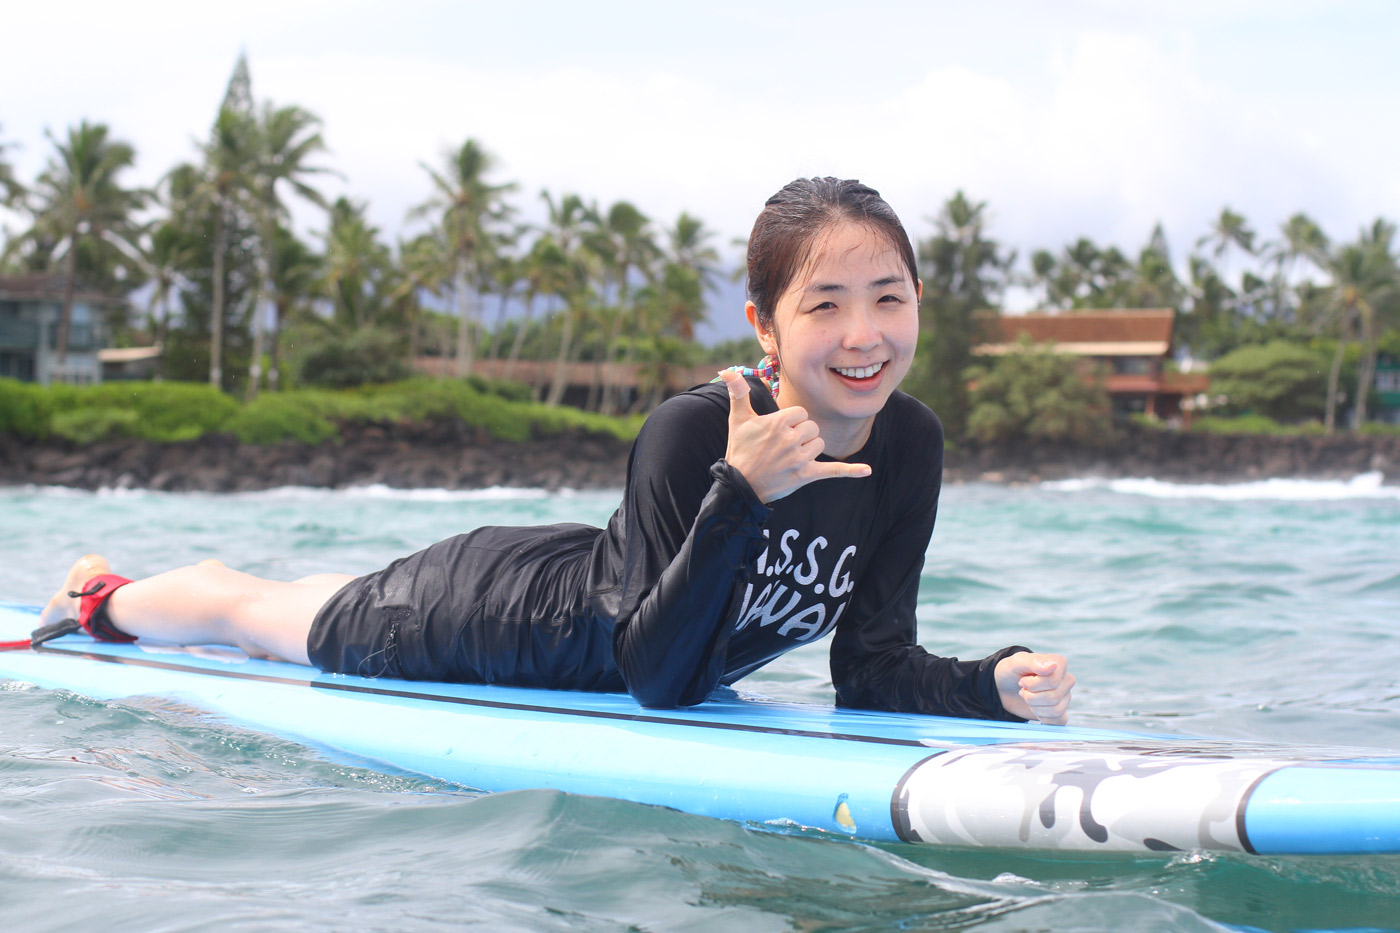 A shaka is always a good thing when surfing